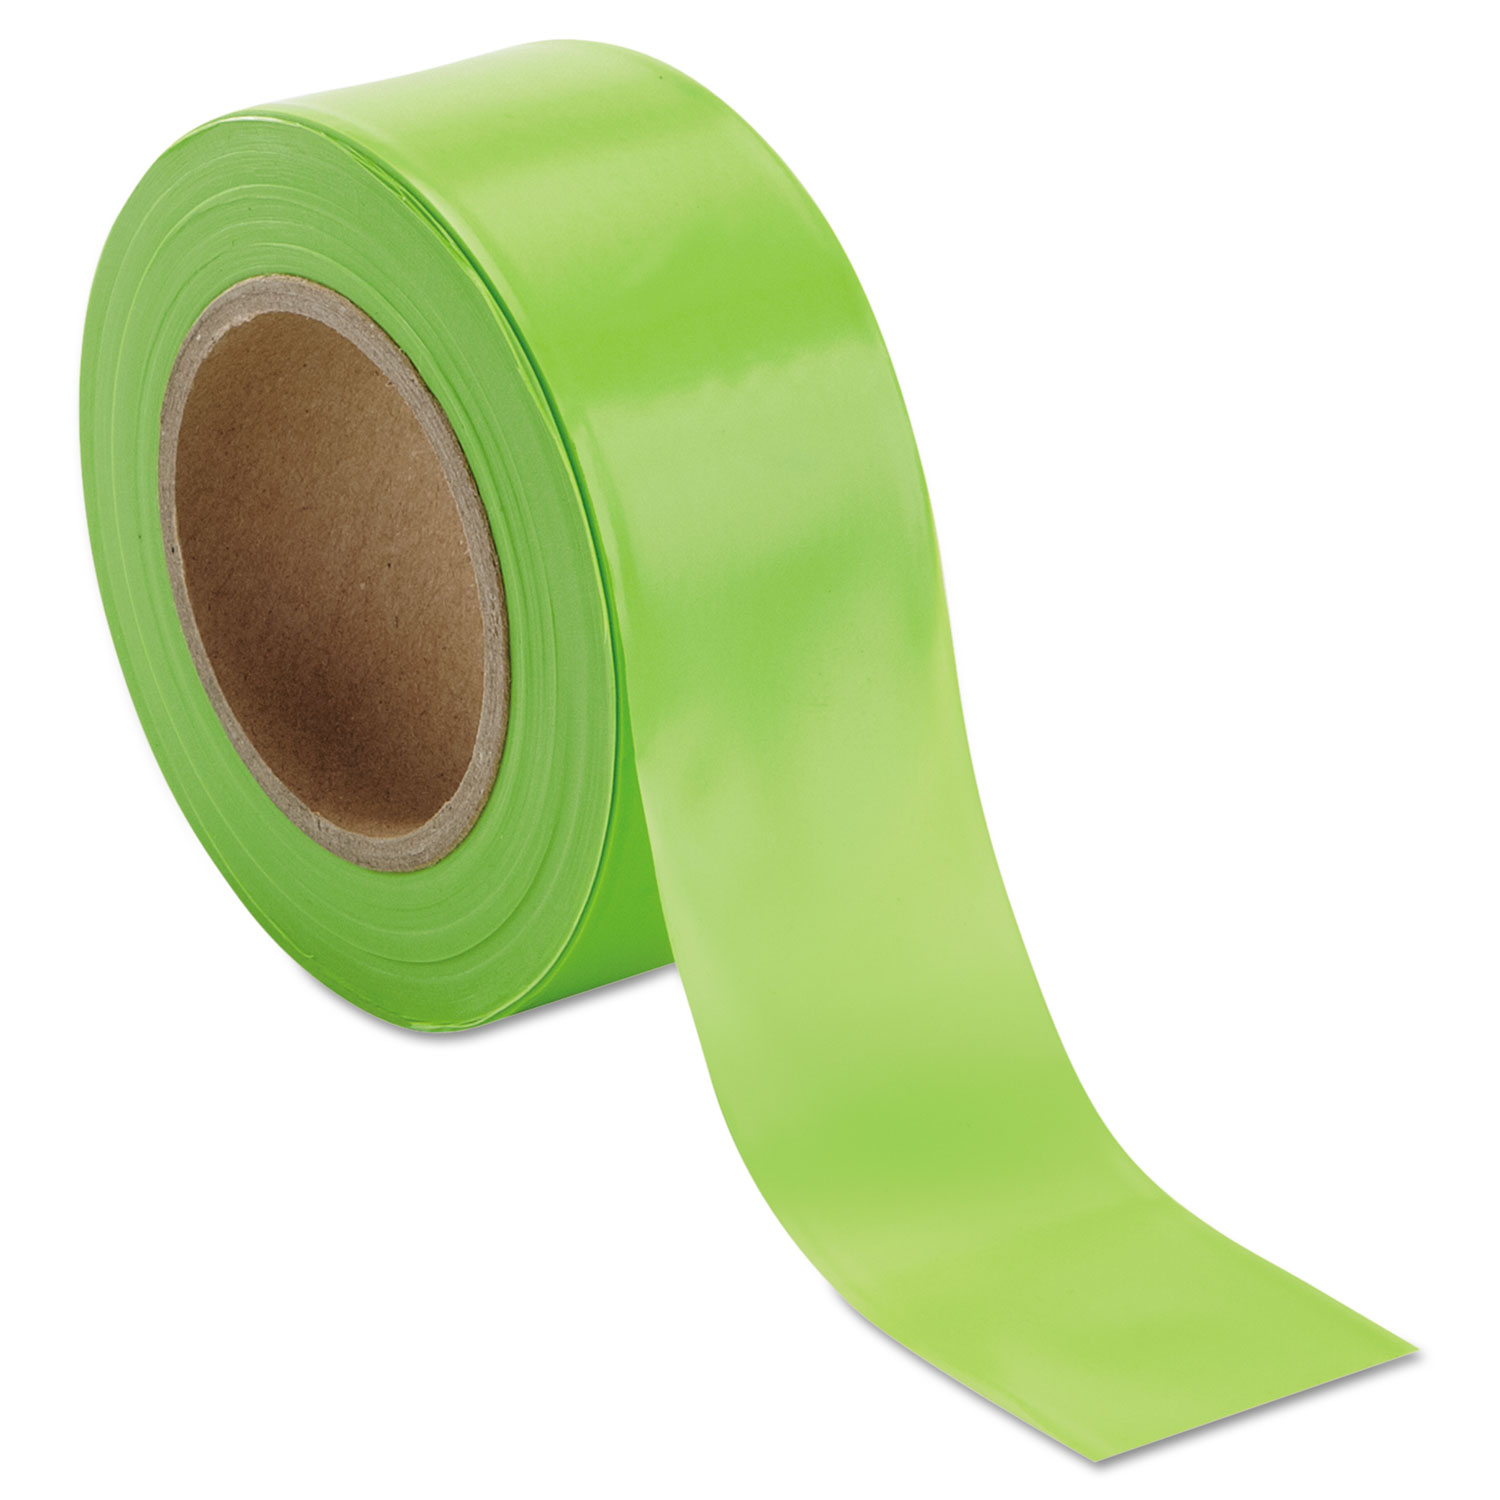 150-GL Flagging Tape, Glo-Lime